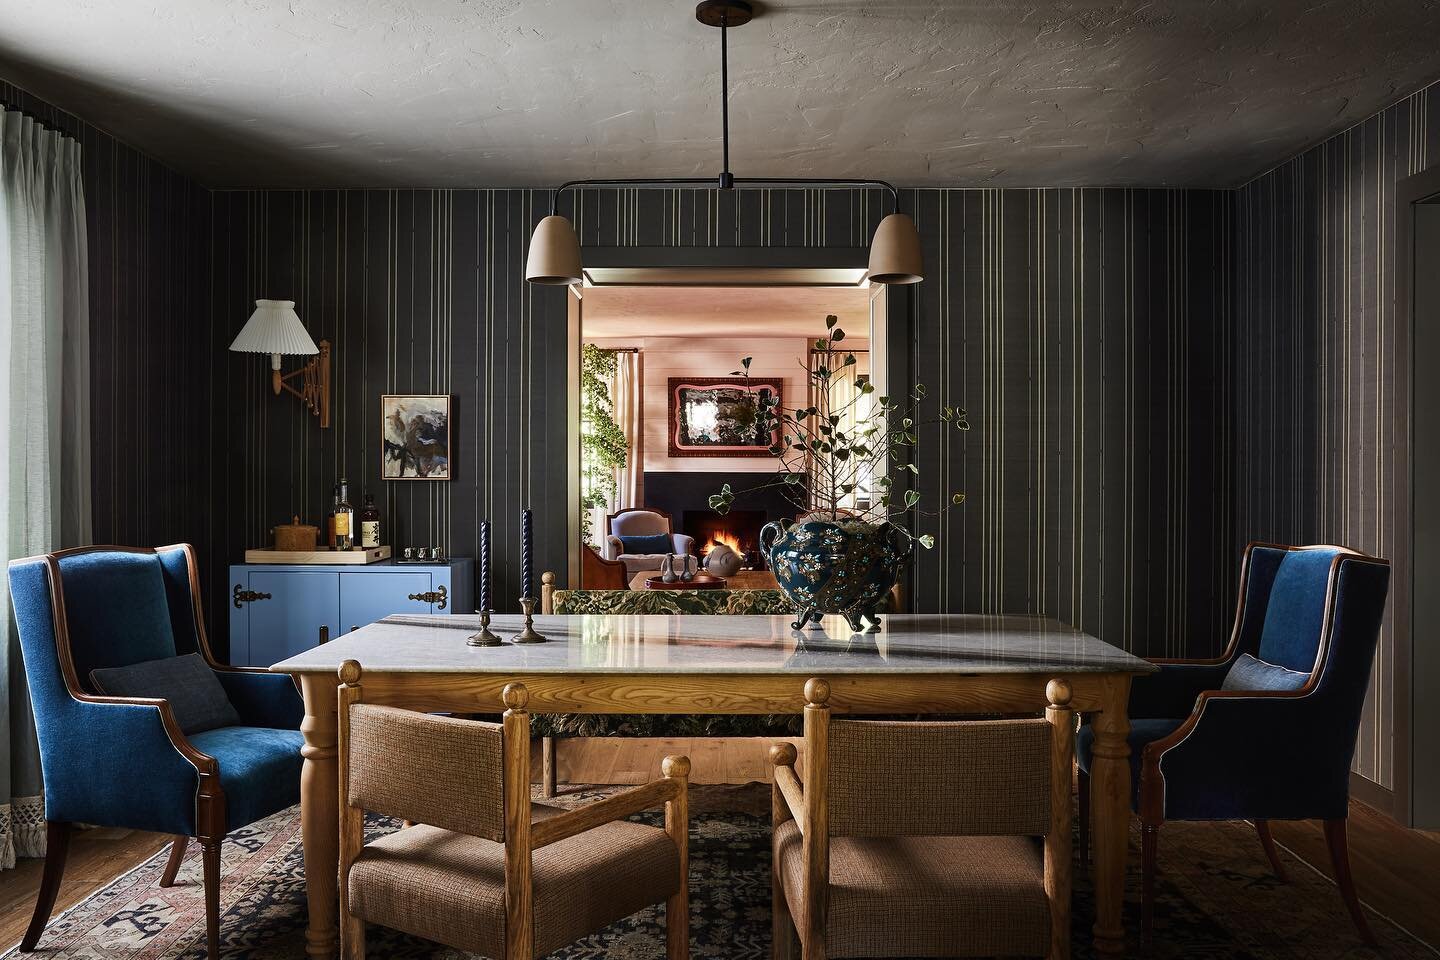 One of my favorite dining room transformations. Perfectly imperfect striped grasscloth wallpaper is complemented by our signature style accents and moody material mix. It's all about striking a balance and selecting elements that combine to create an